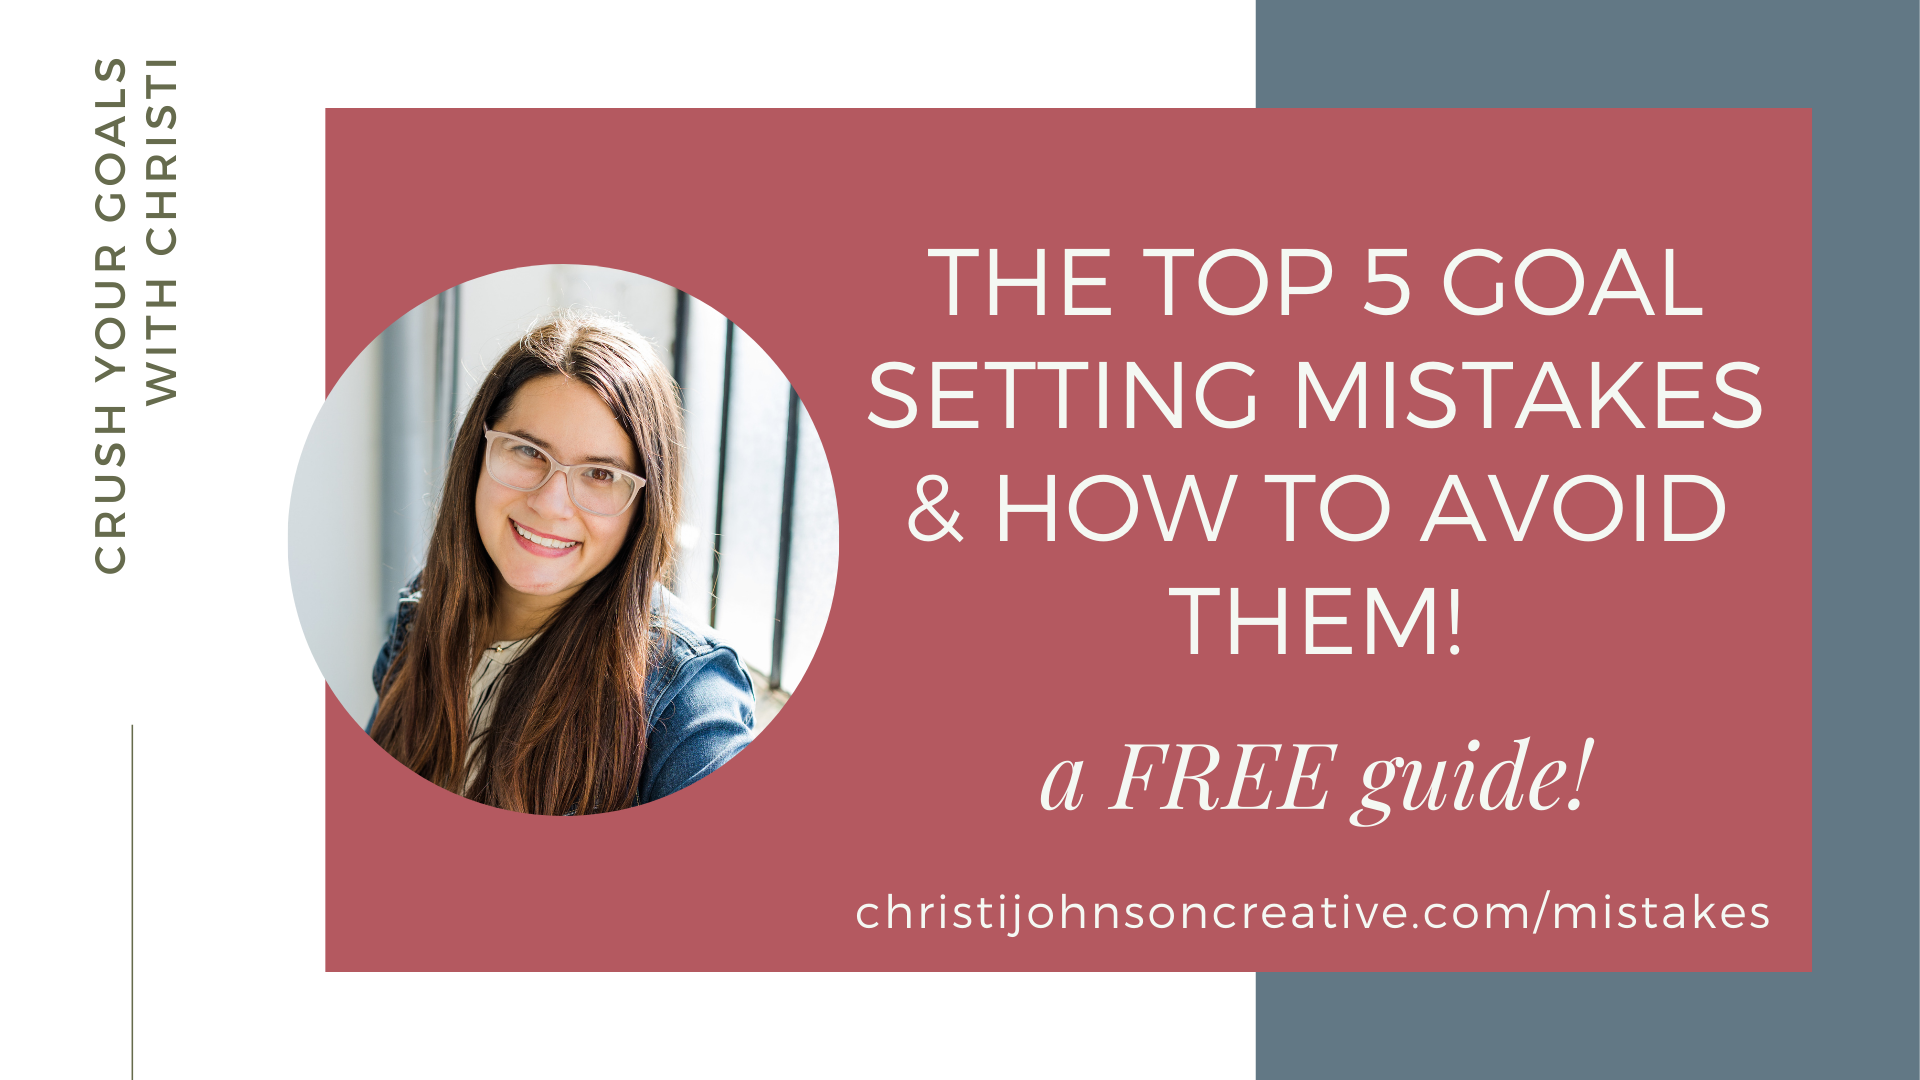 The Top 5 Goal Setting Mistakes & How You Can Avoid Them written in white text on a pink background. There is a picture of Christi wearing a denim jacket posing beside a window.